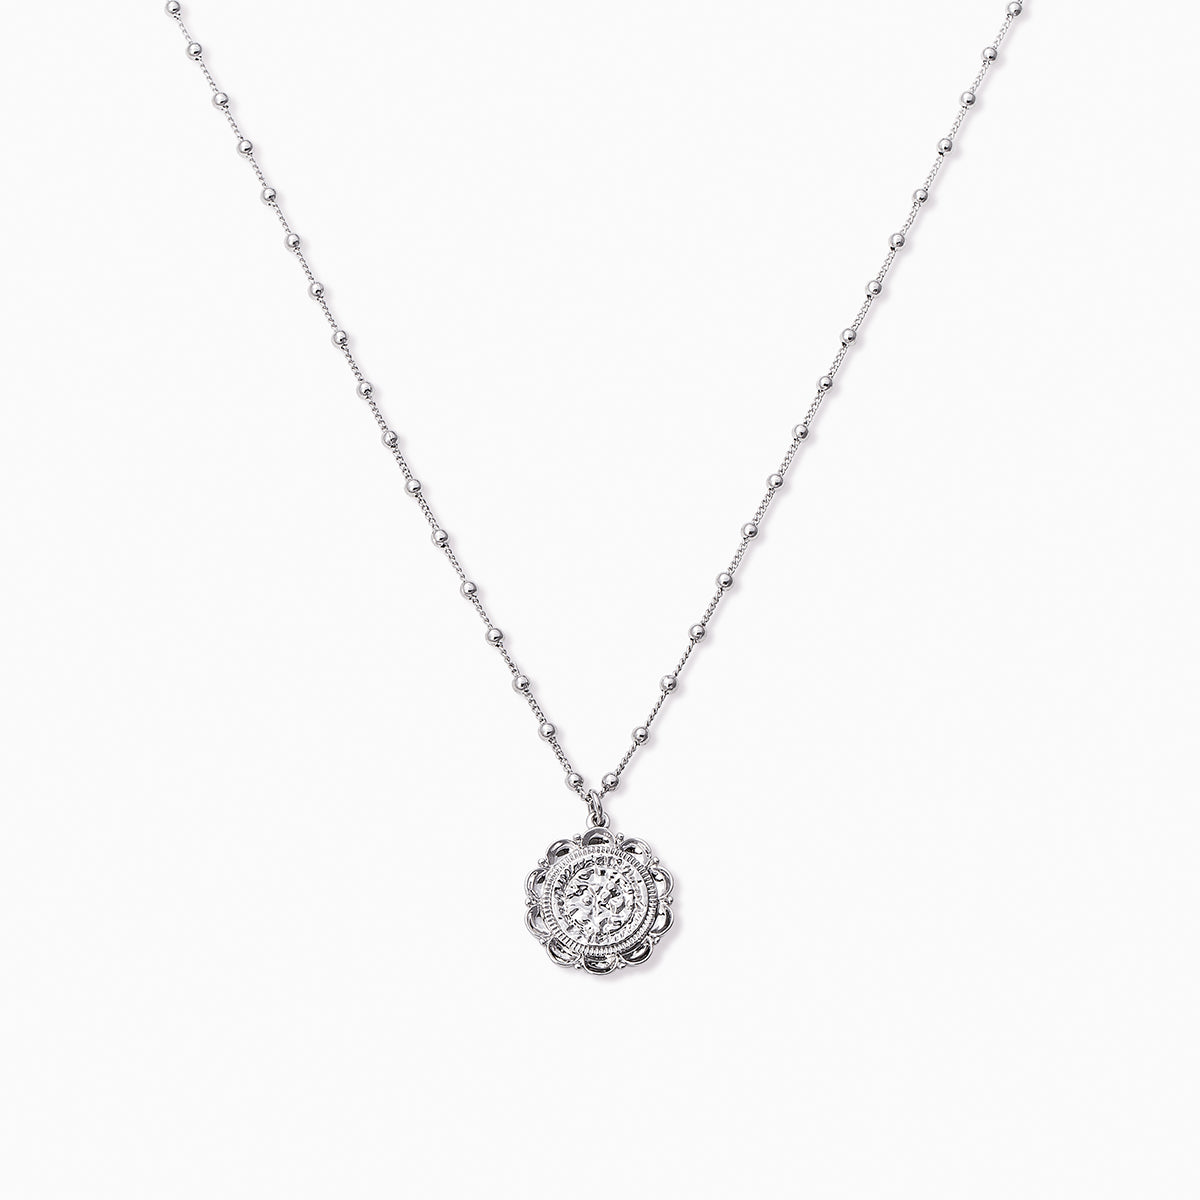 Atocha Necklace Small | Sterling Silver | Product Image | Uncommon James